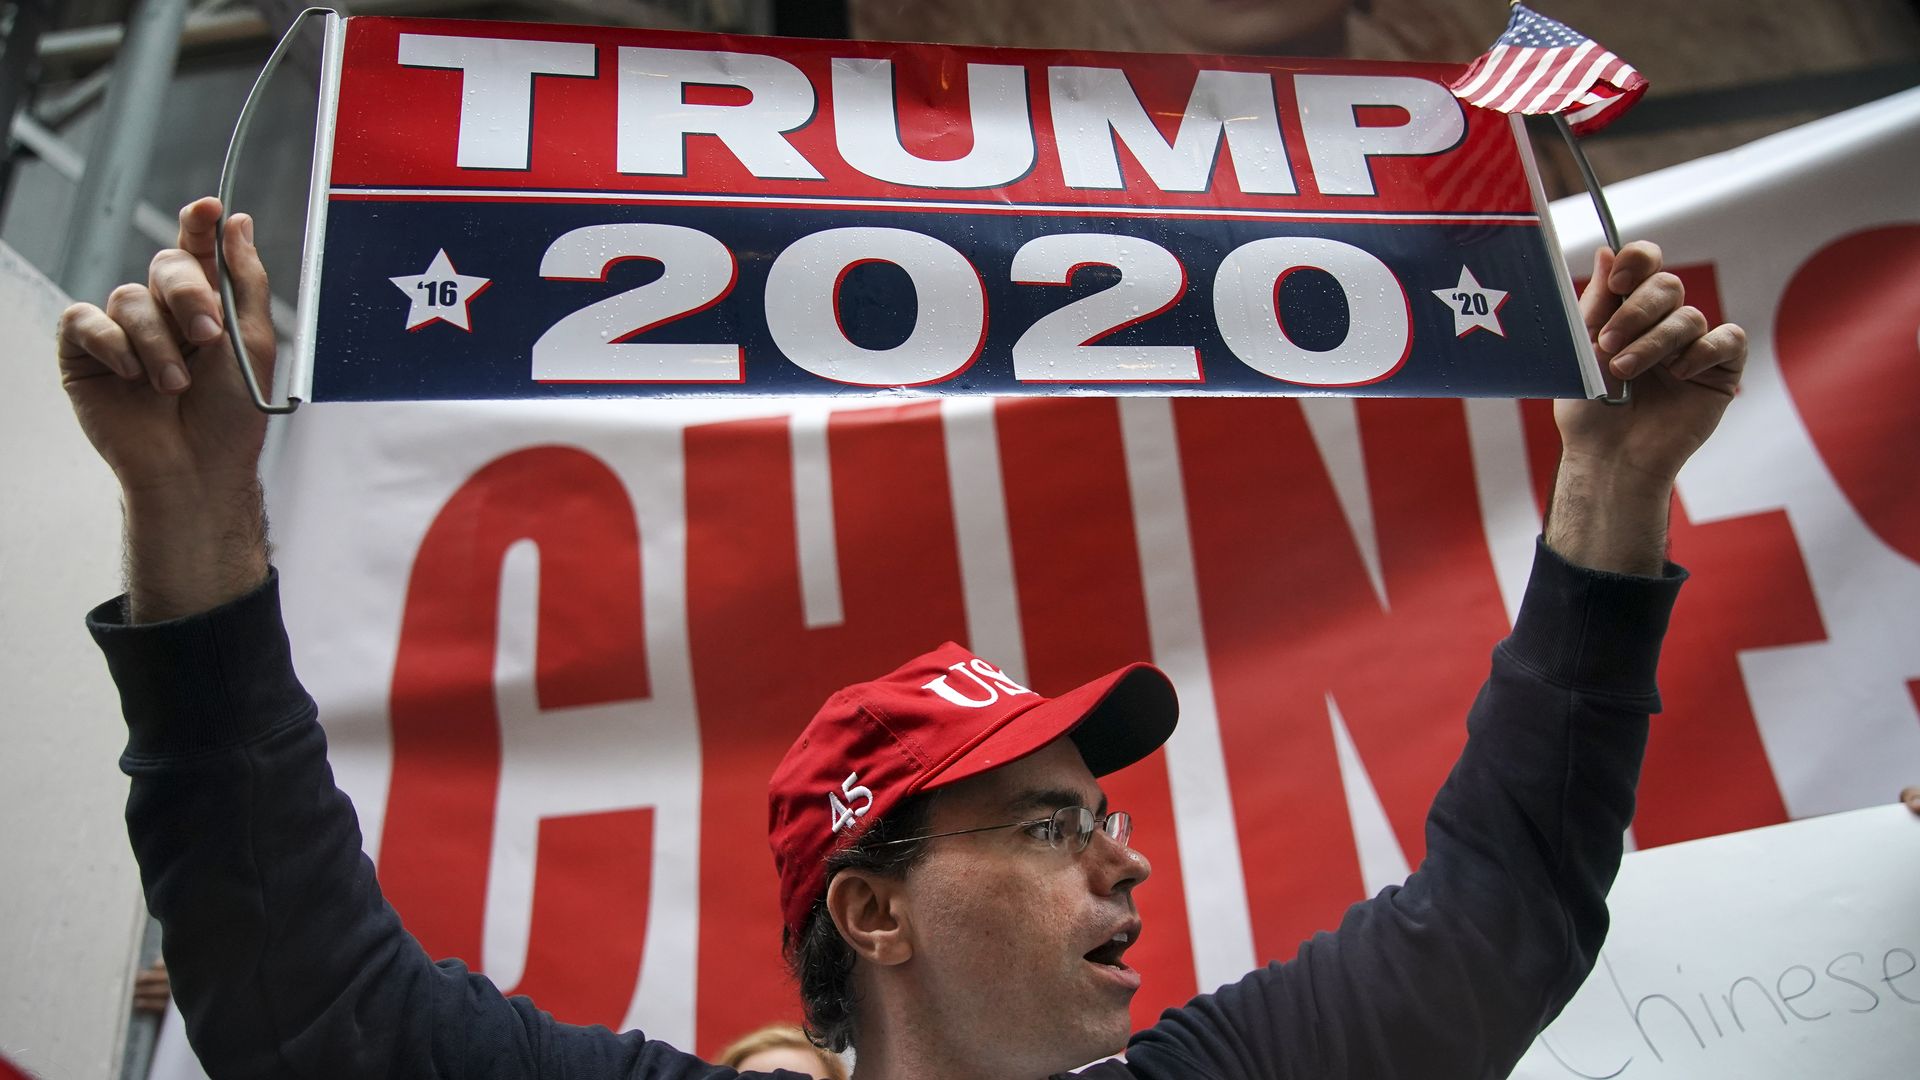 In this image, a man holds up a banner that reads "Trump 2020"